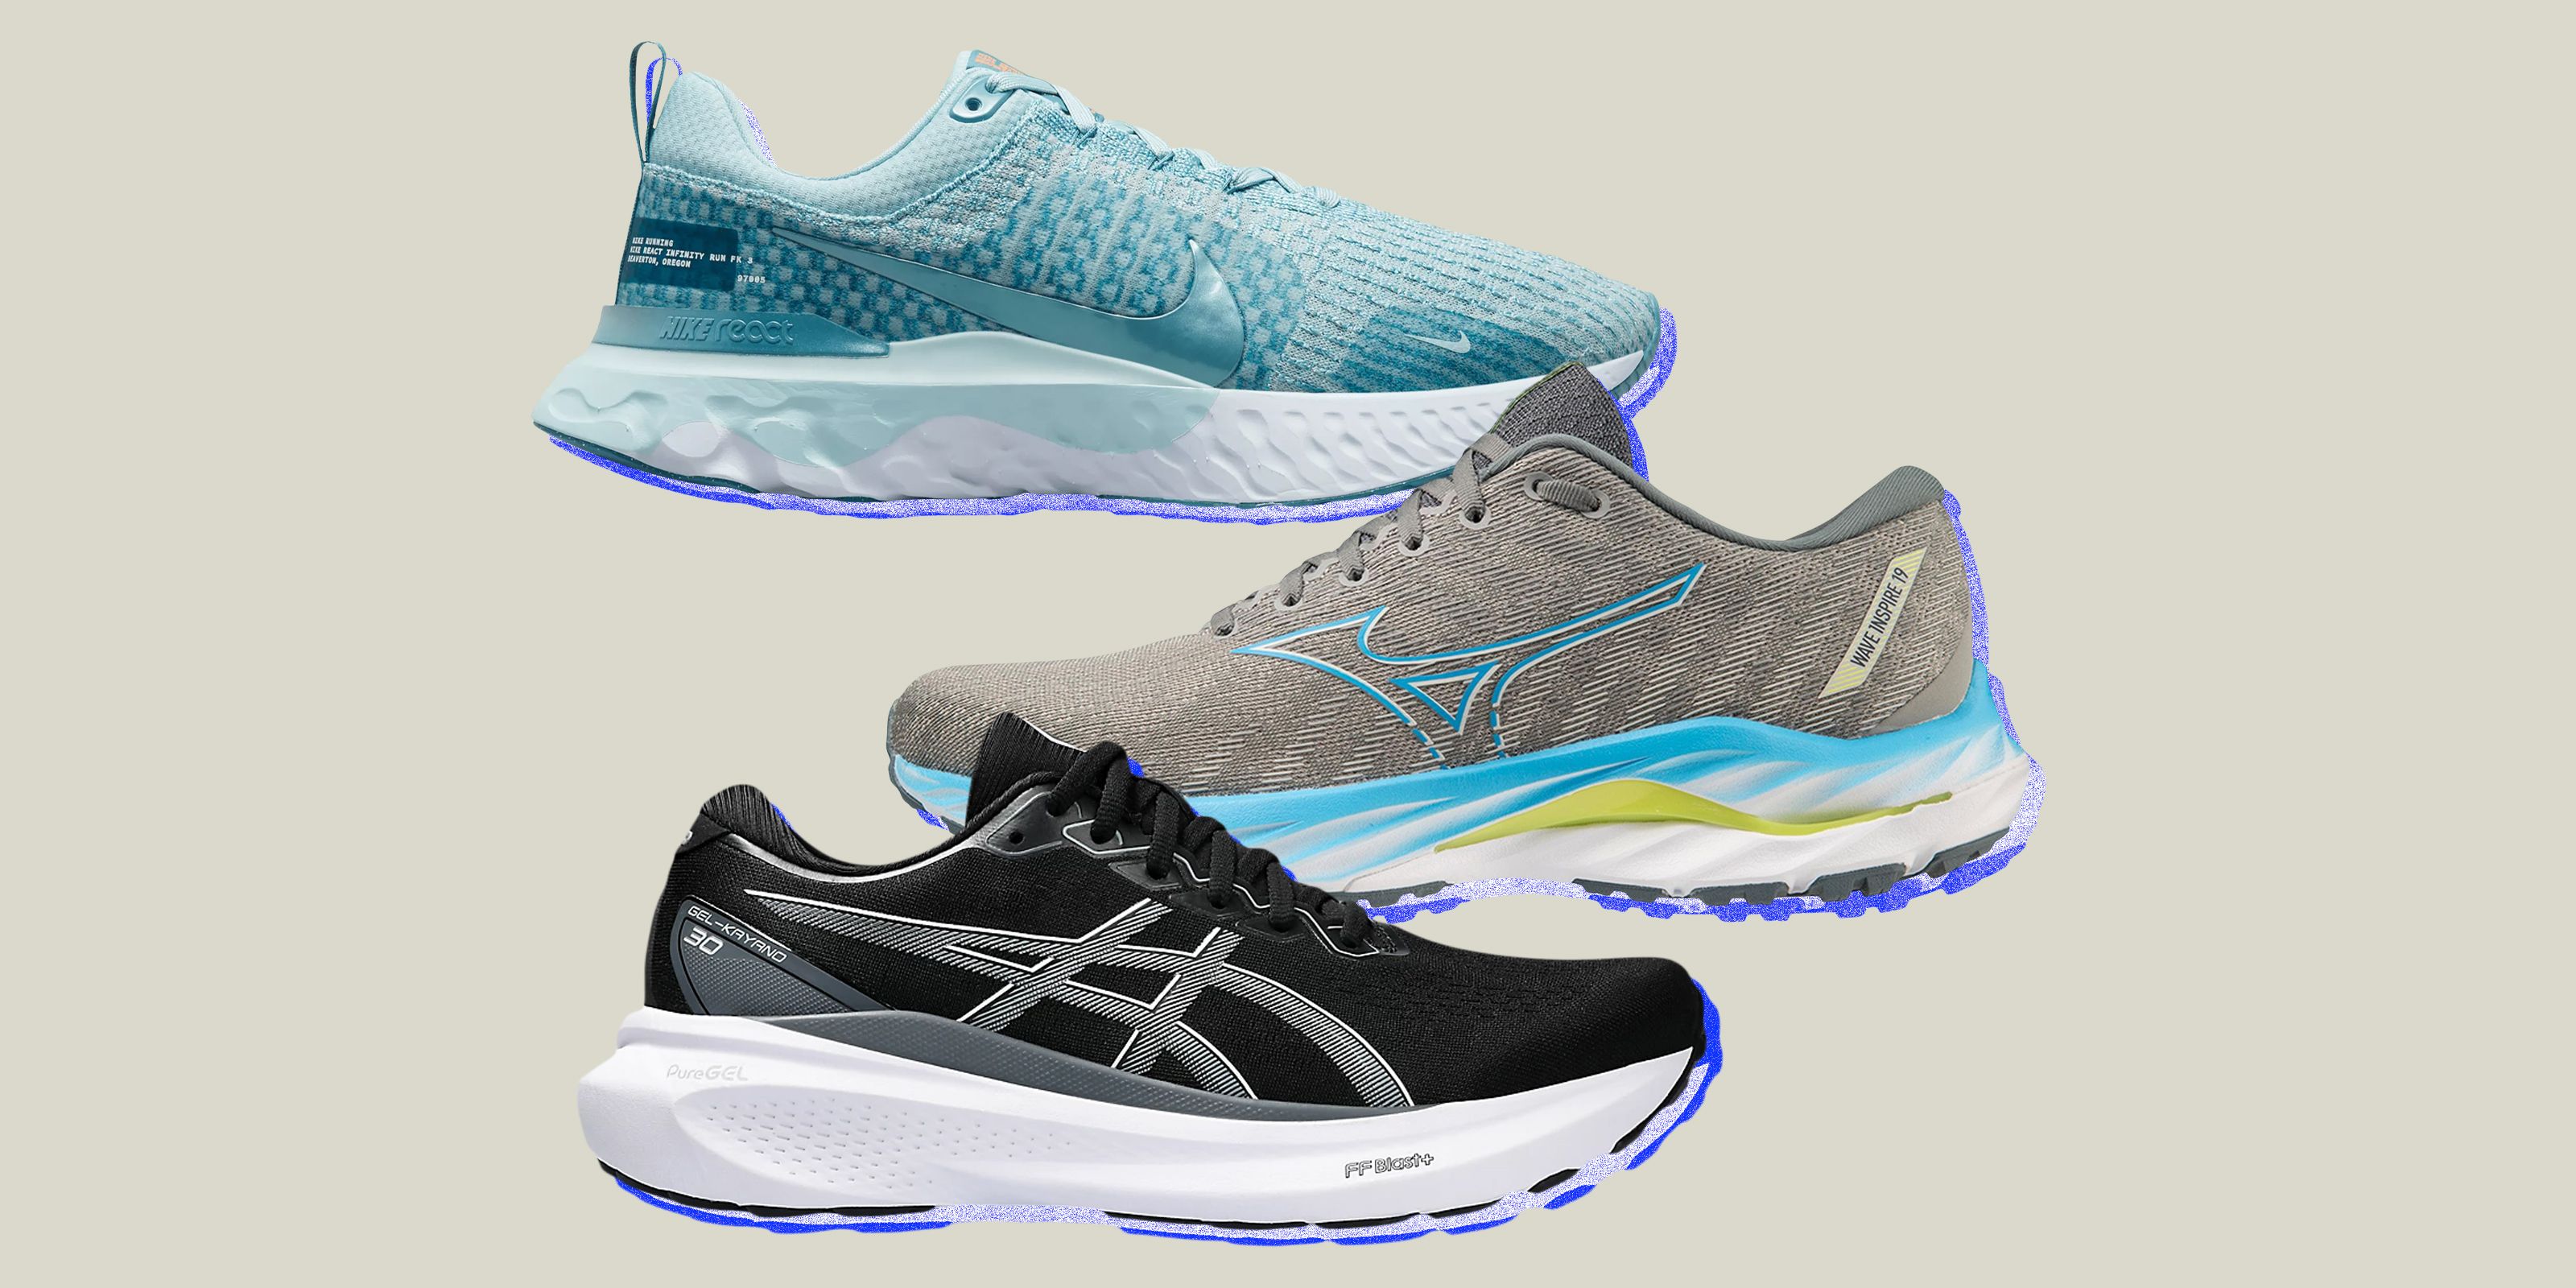 The 10 Best Running Shoes for Stability in 2023 - The Wired Runner